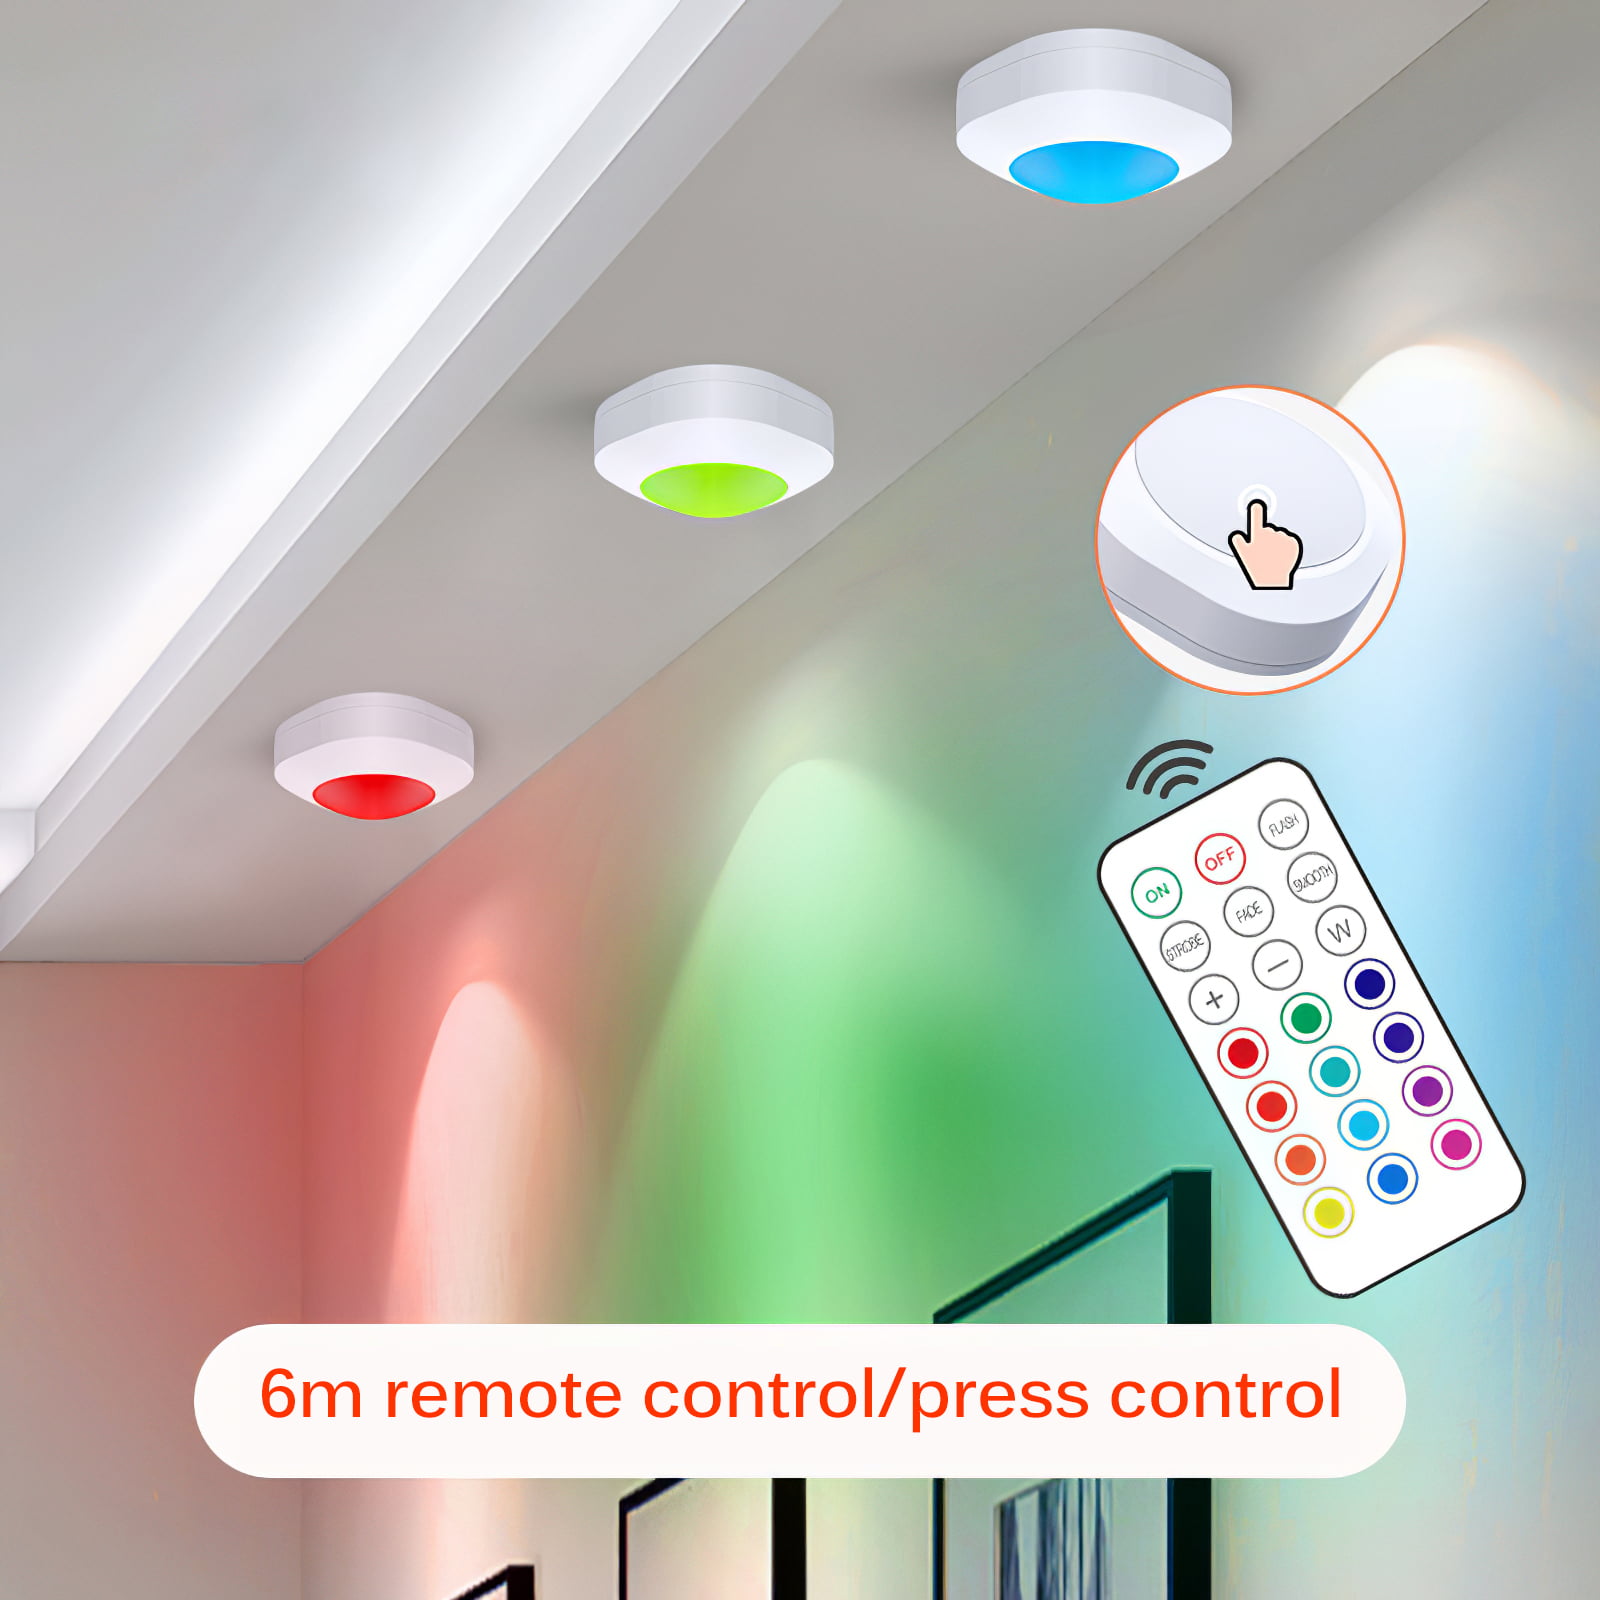 Details about   Cordless Ceiling Wall Light Remote Control Battery Operated Installs Instantly 